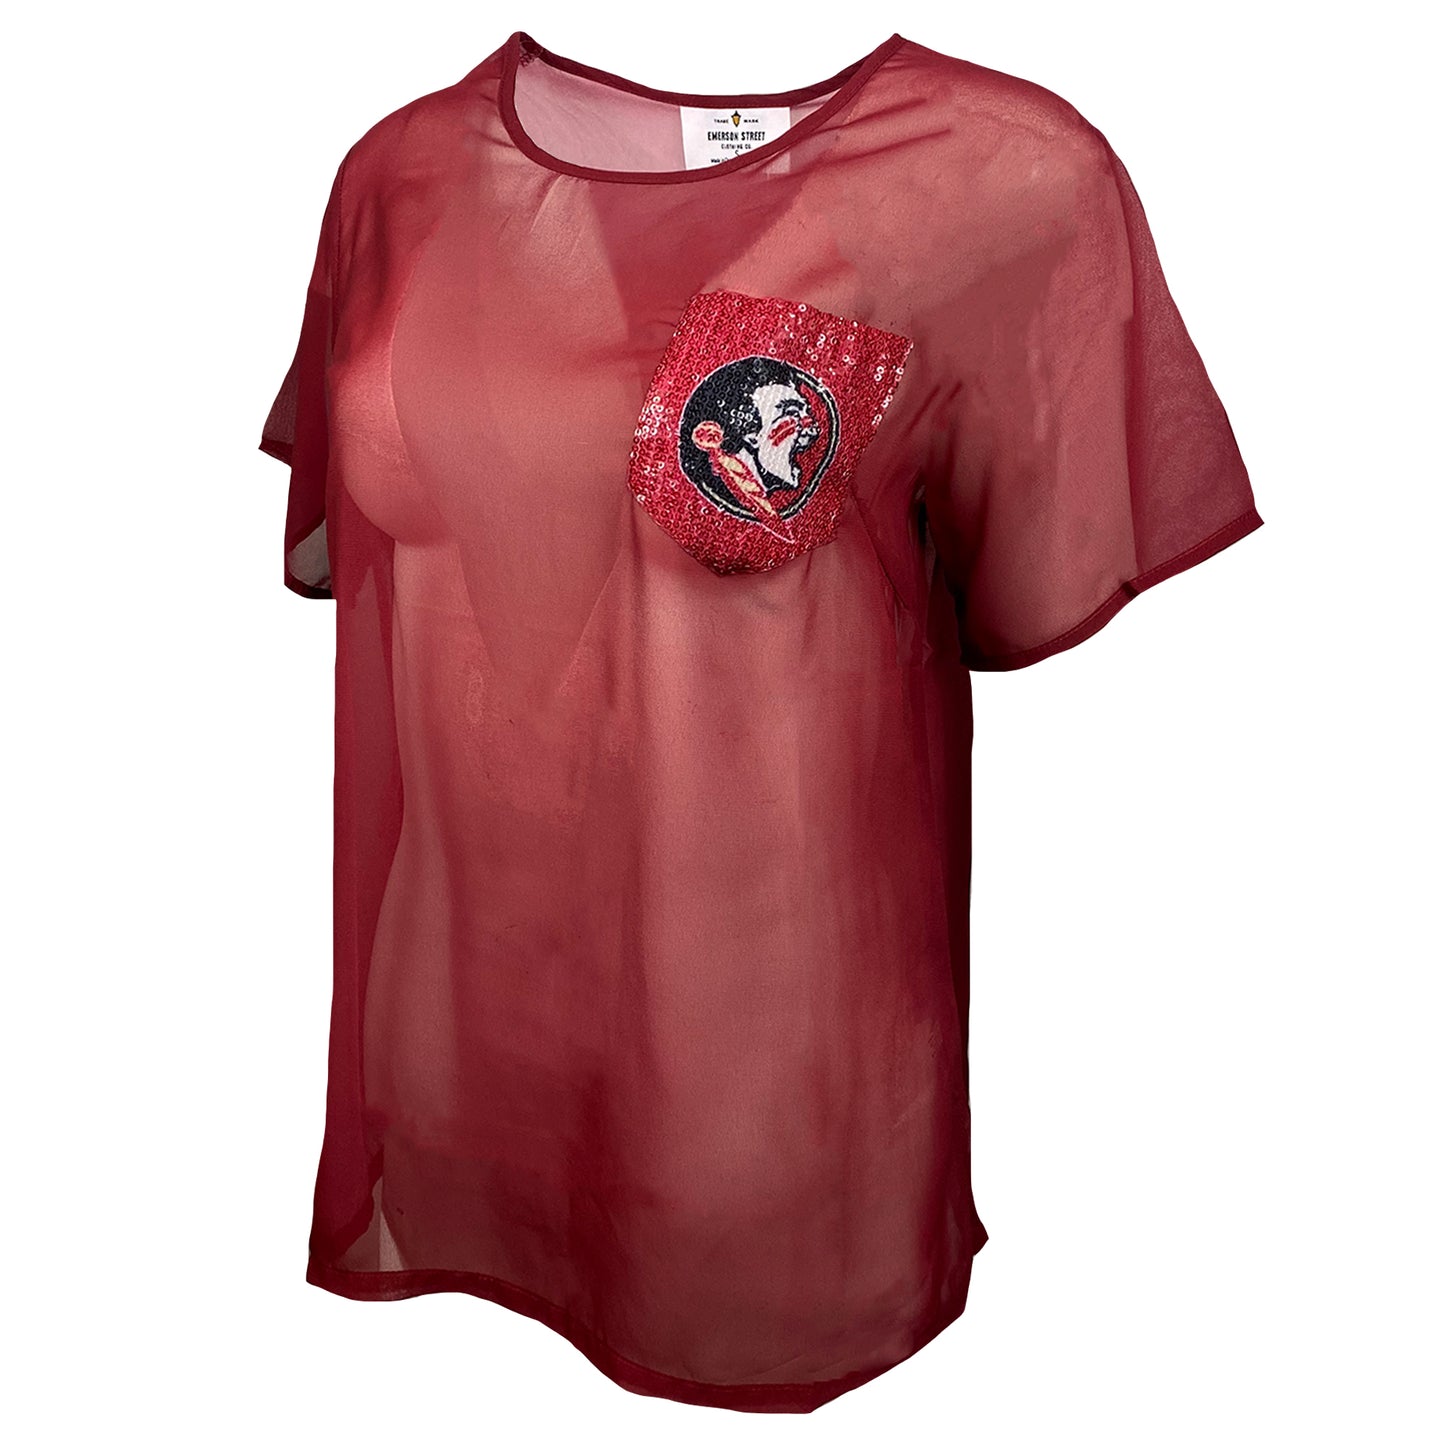 Florida State Seminoles Sheer Top with Sequin Pocket